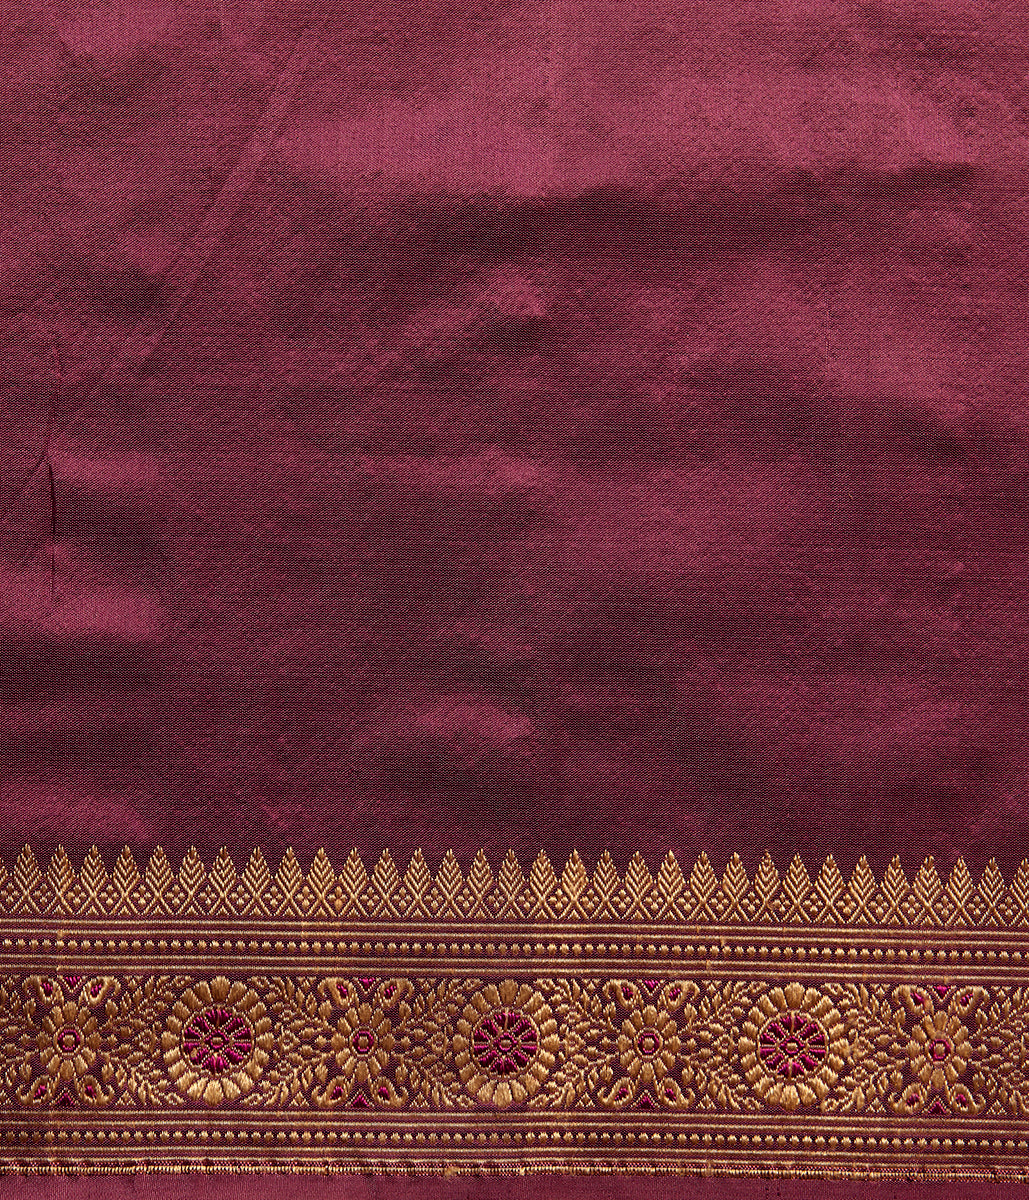 Handwoven_Banaras_Baluchari_in_Old_Rose_with_Small_Floral_Booti_and_Kalka_Pallu_WeaverStory_05